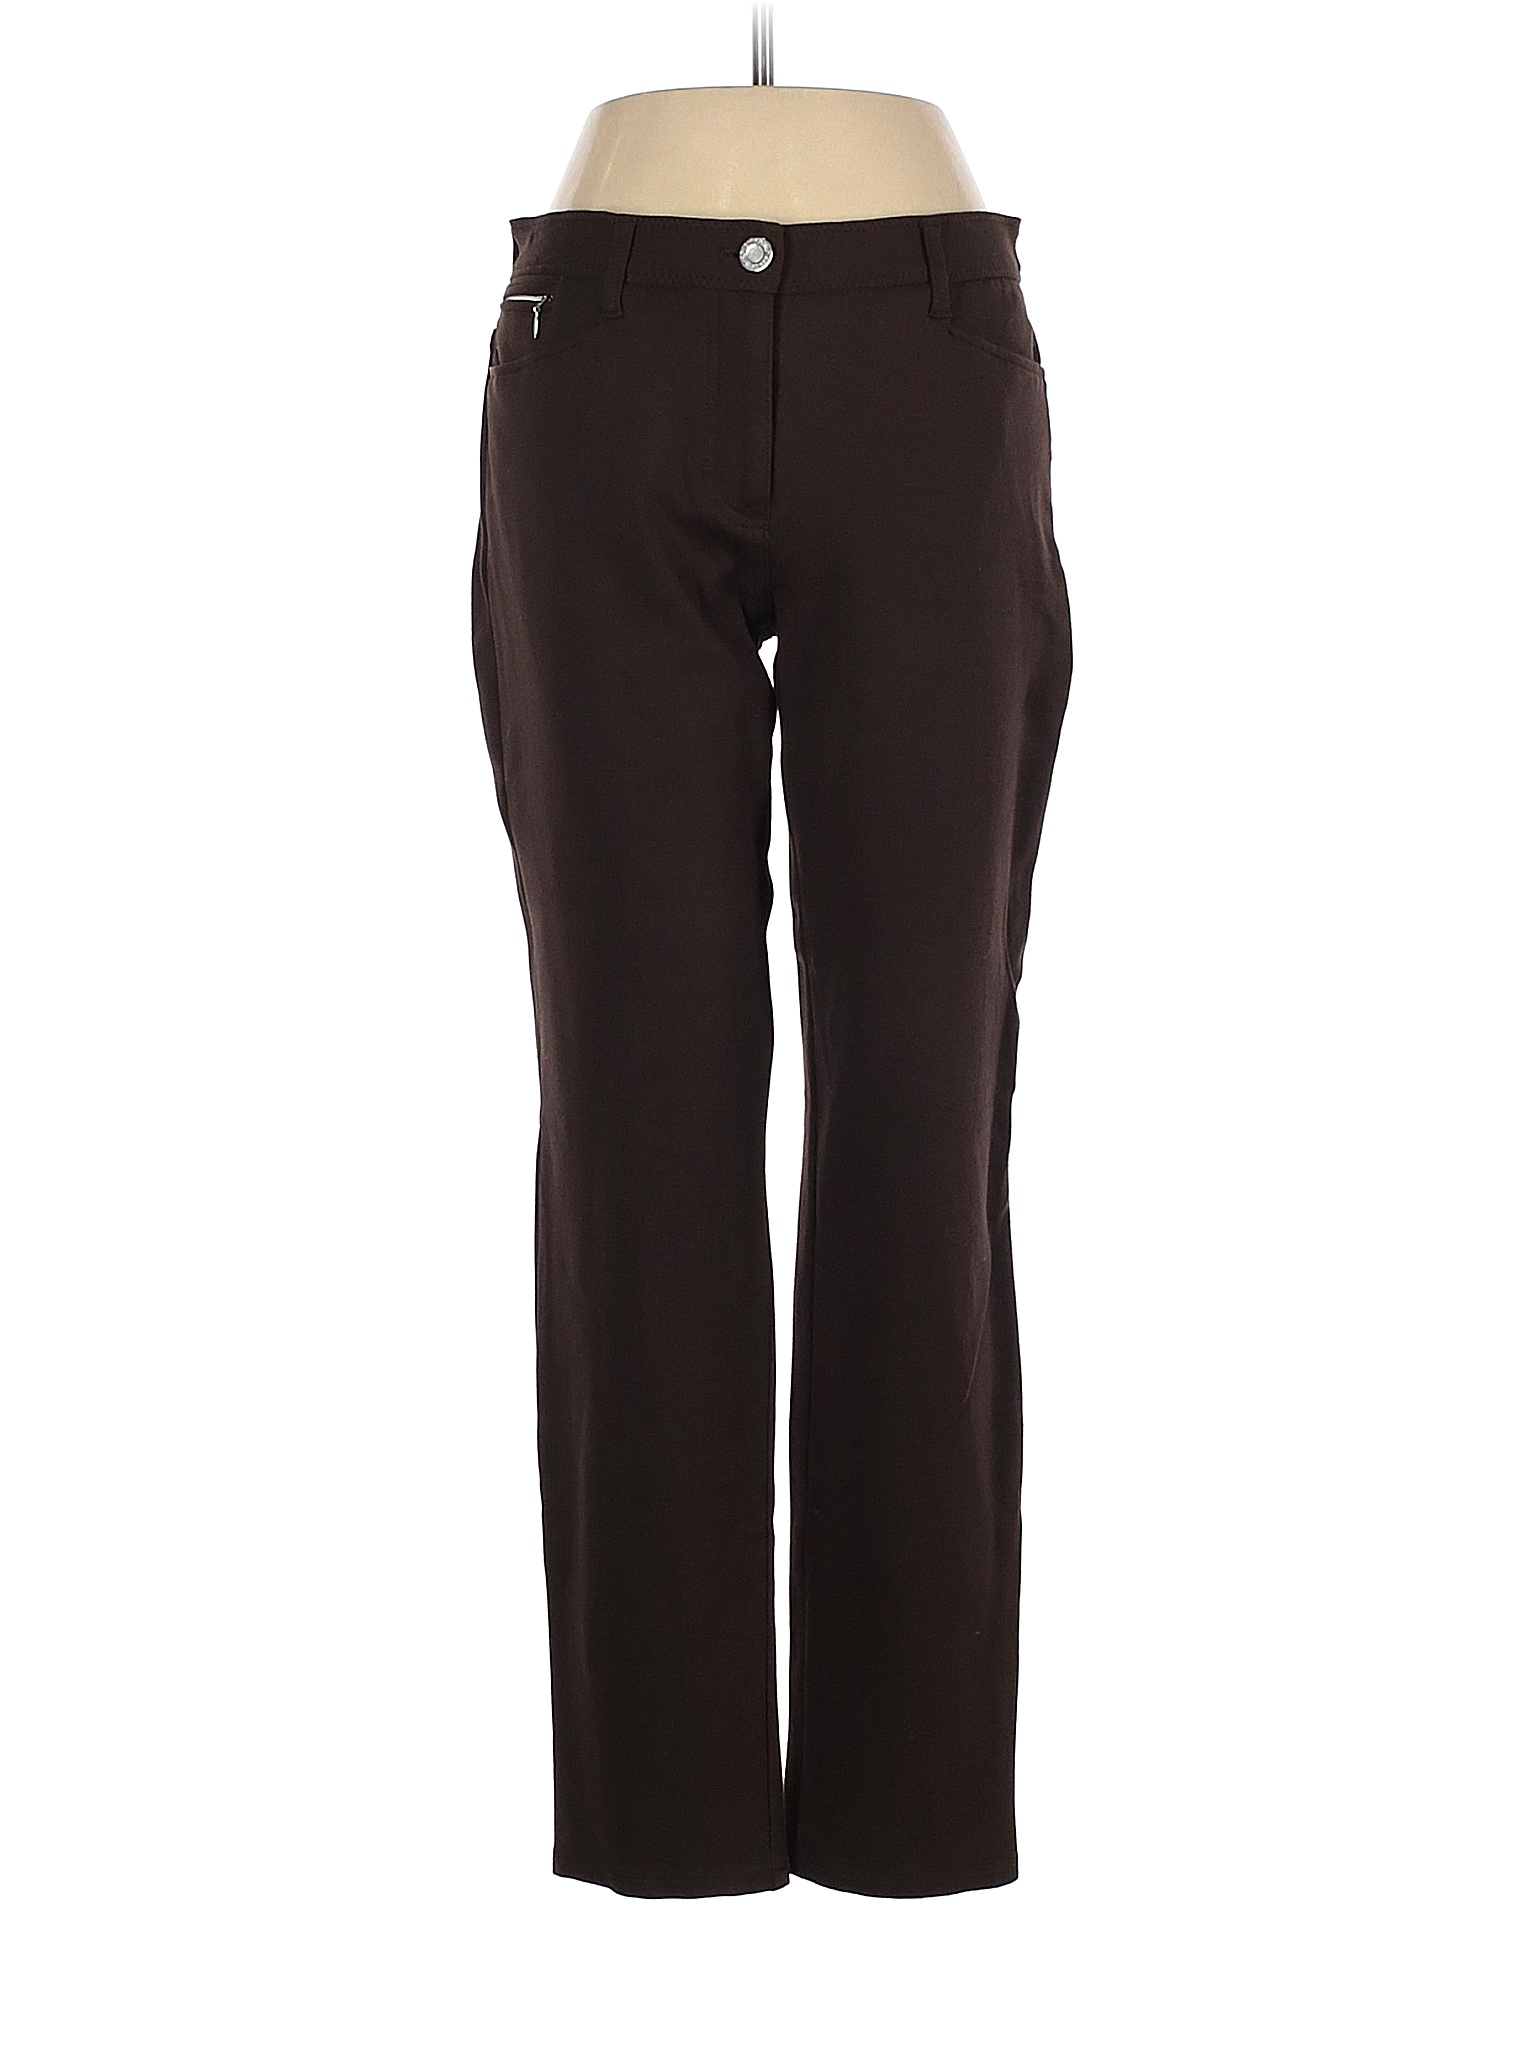 So Slimming by Chico's Solid Brown Casual Pants Size Sm (0.5) - 86% off ...